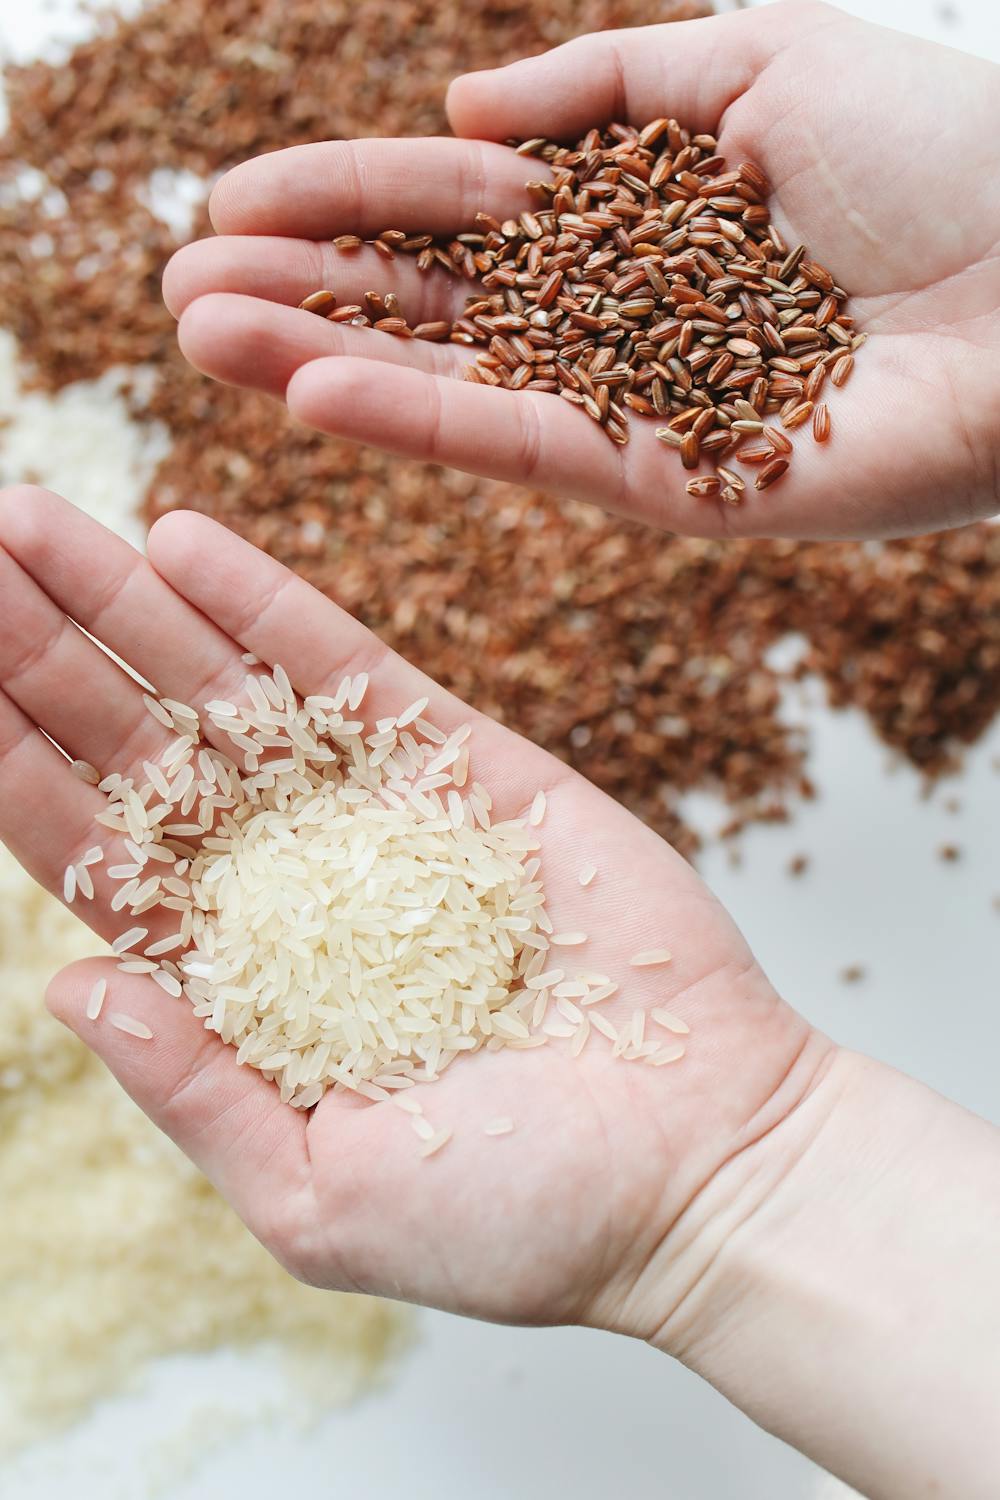 white raice in one hand and brown rice in other hand